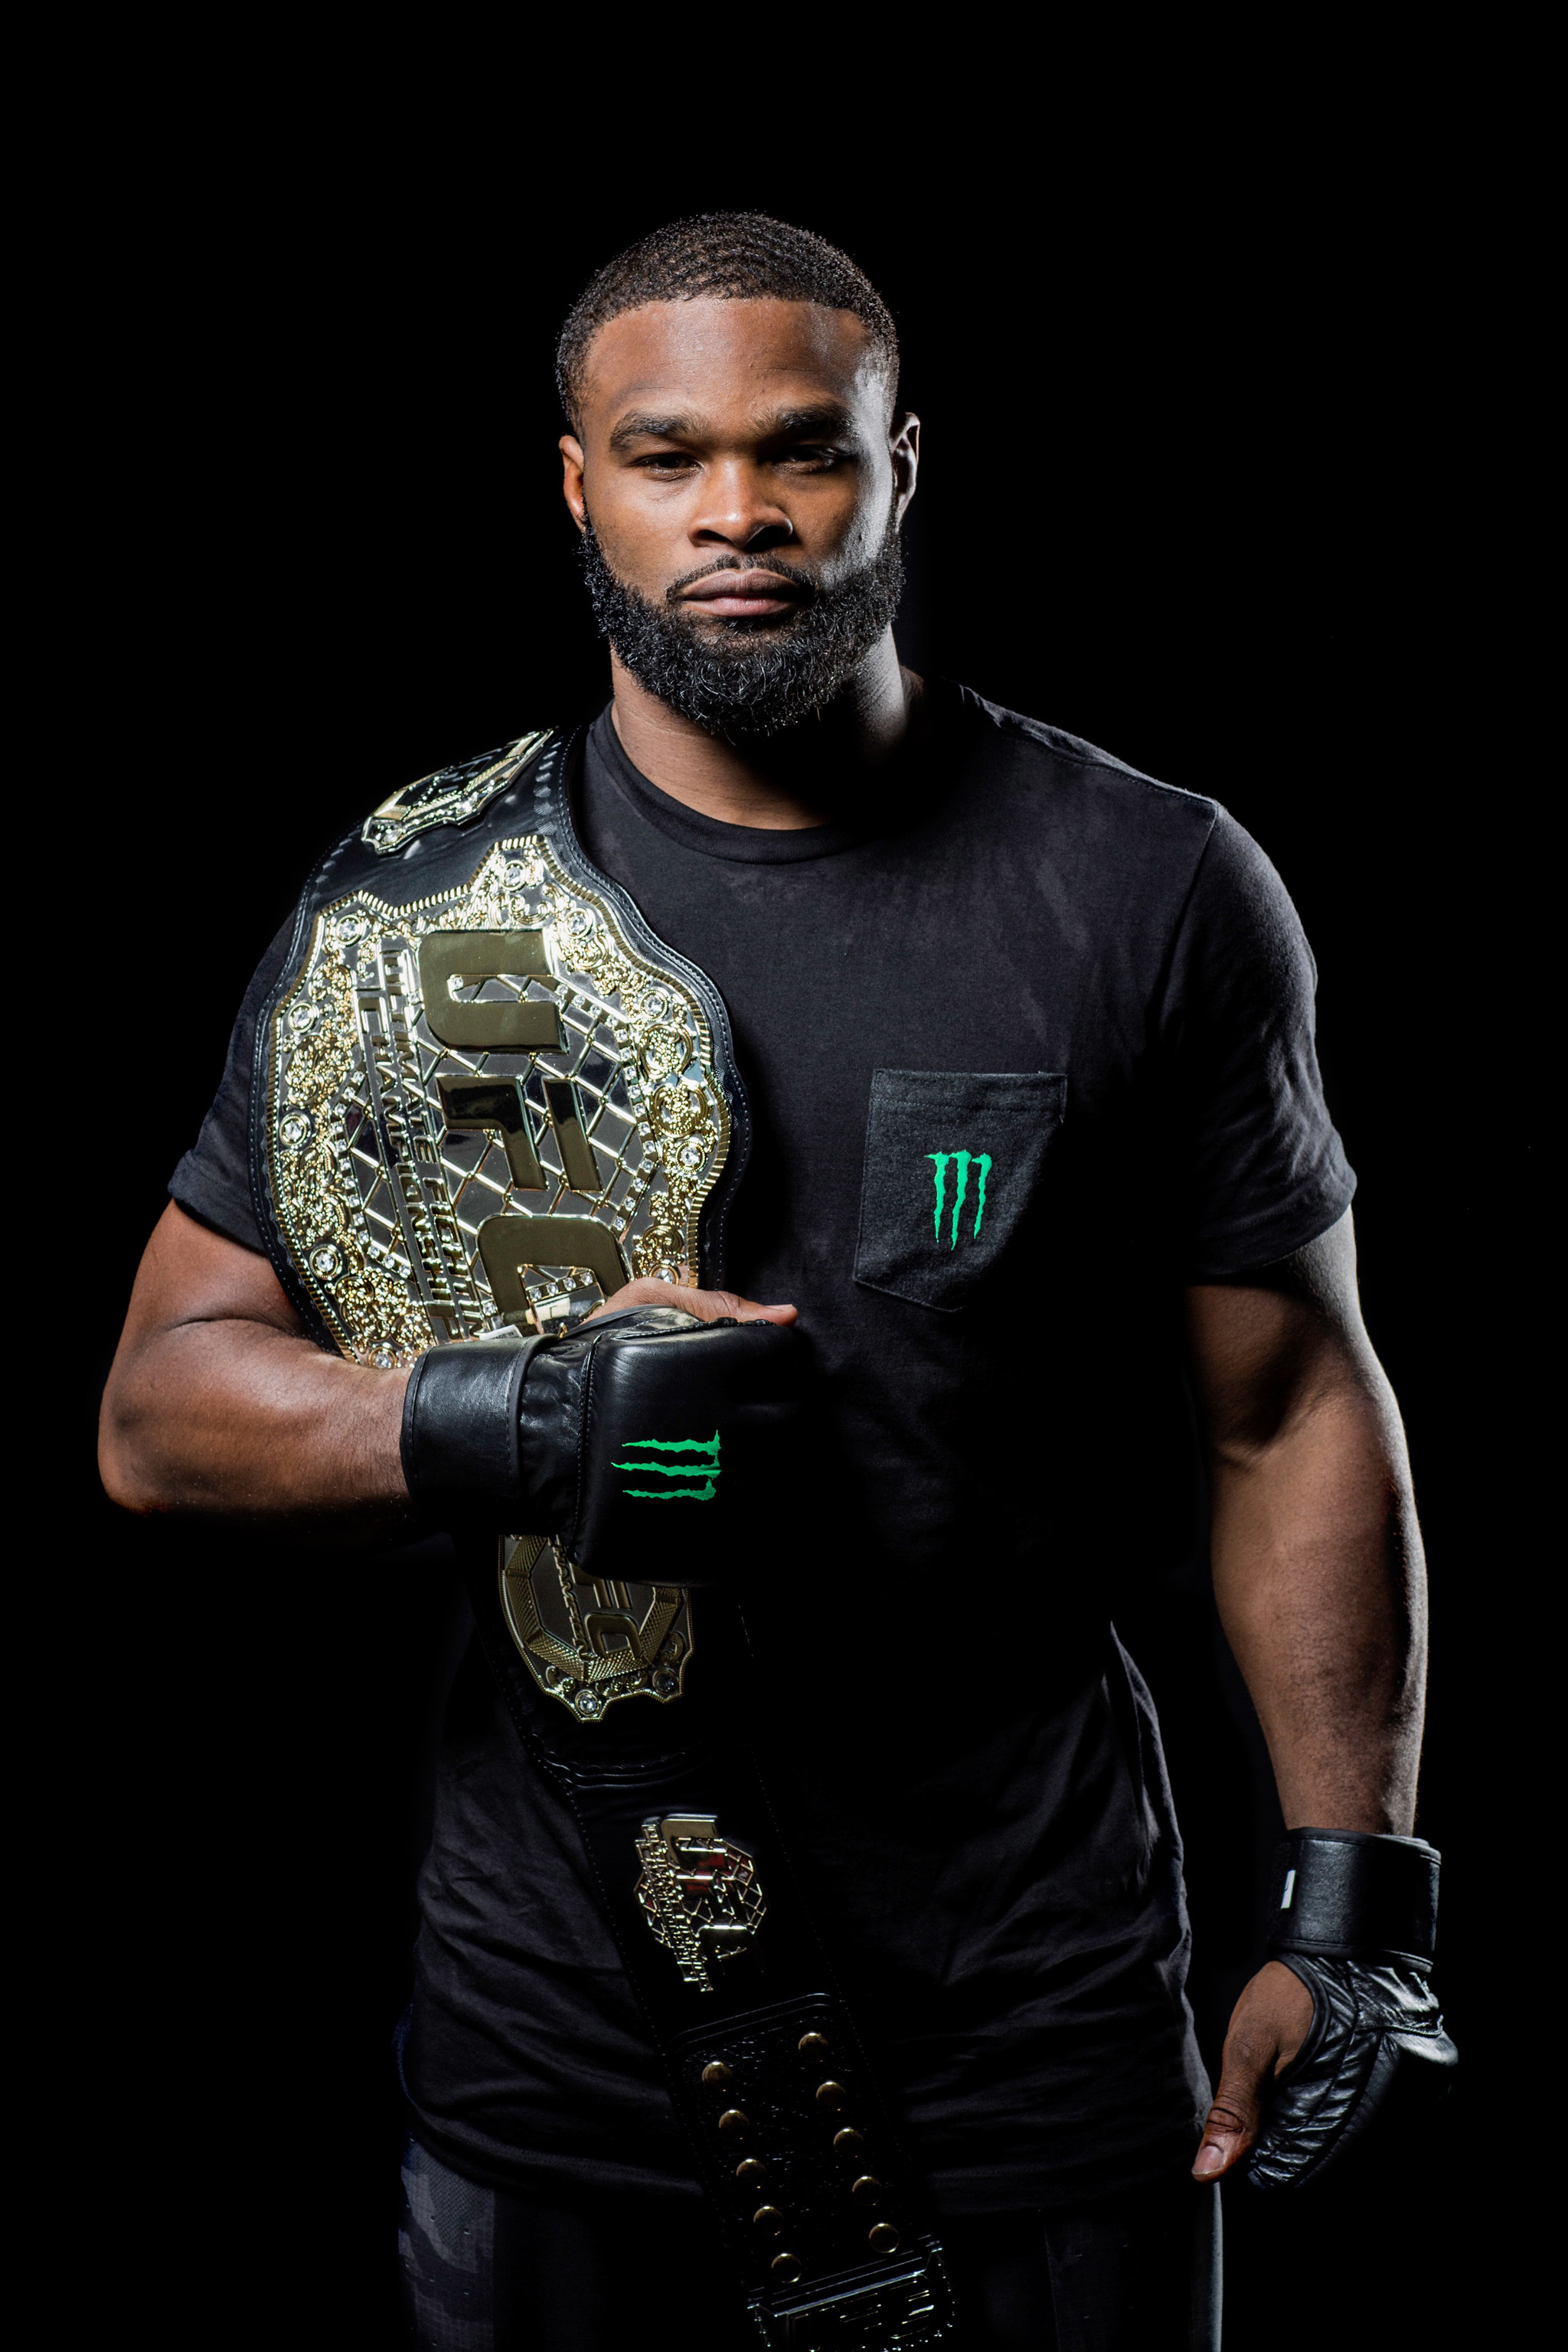 Monster Energy’s Tyron Woodley To Fight on Main Card UFC 205 at Madison Square Garden in New York on November 12